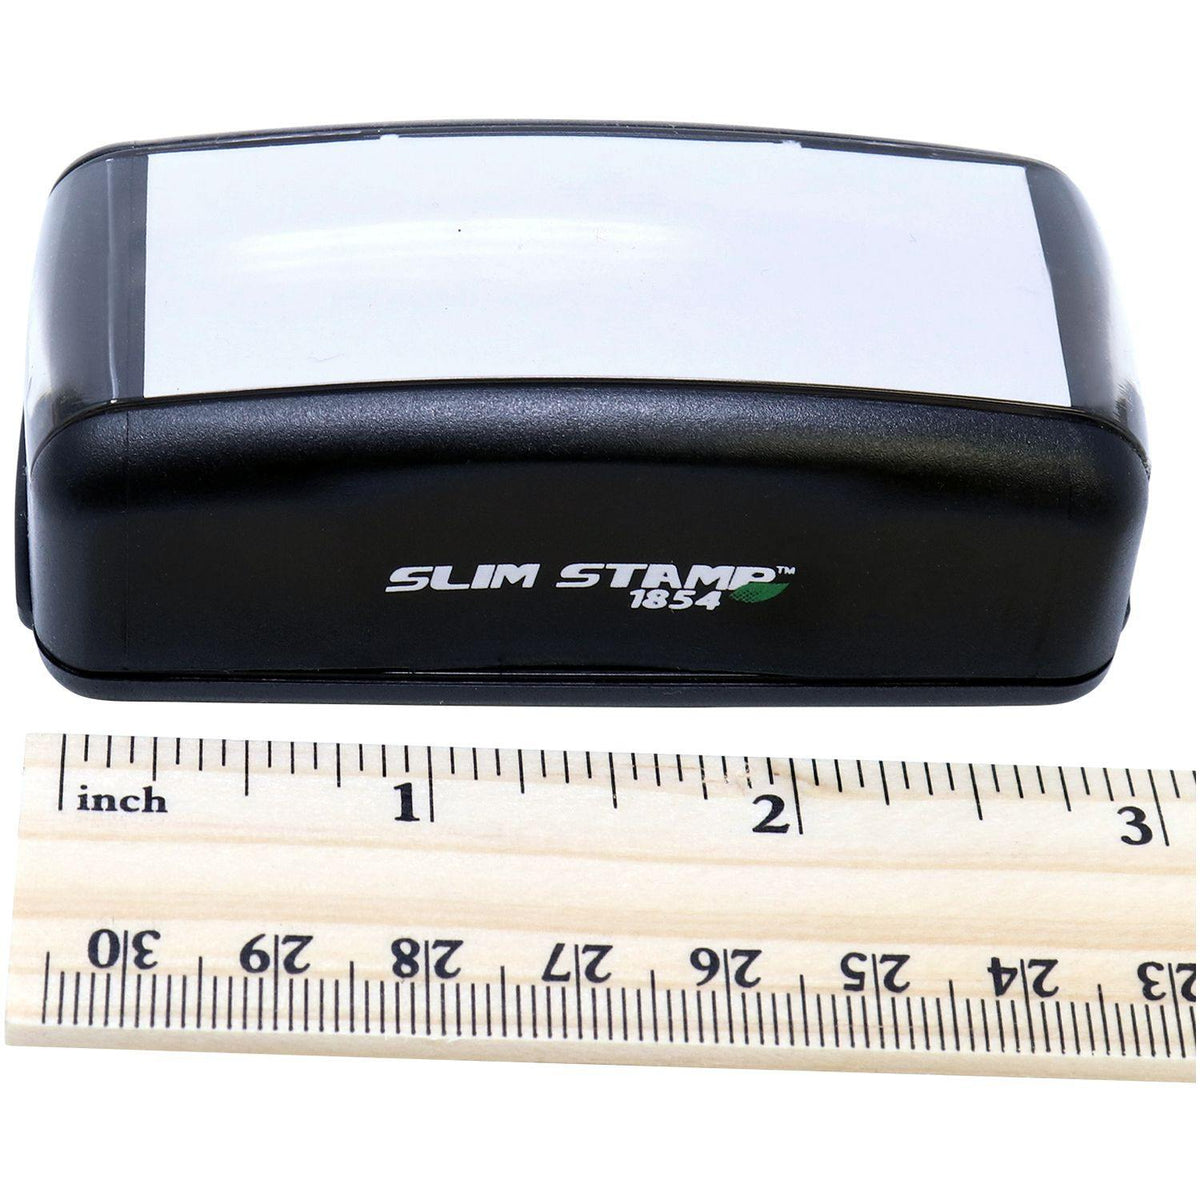 Measurement Large Pre Inked Validate Only Stamp with Ruler